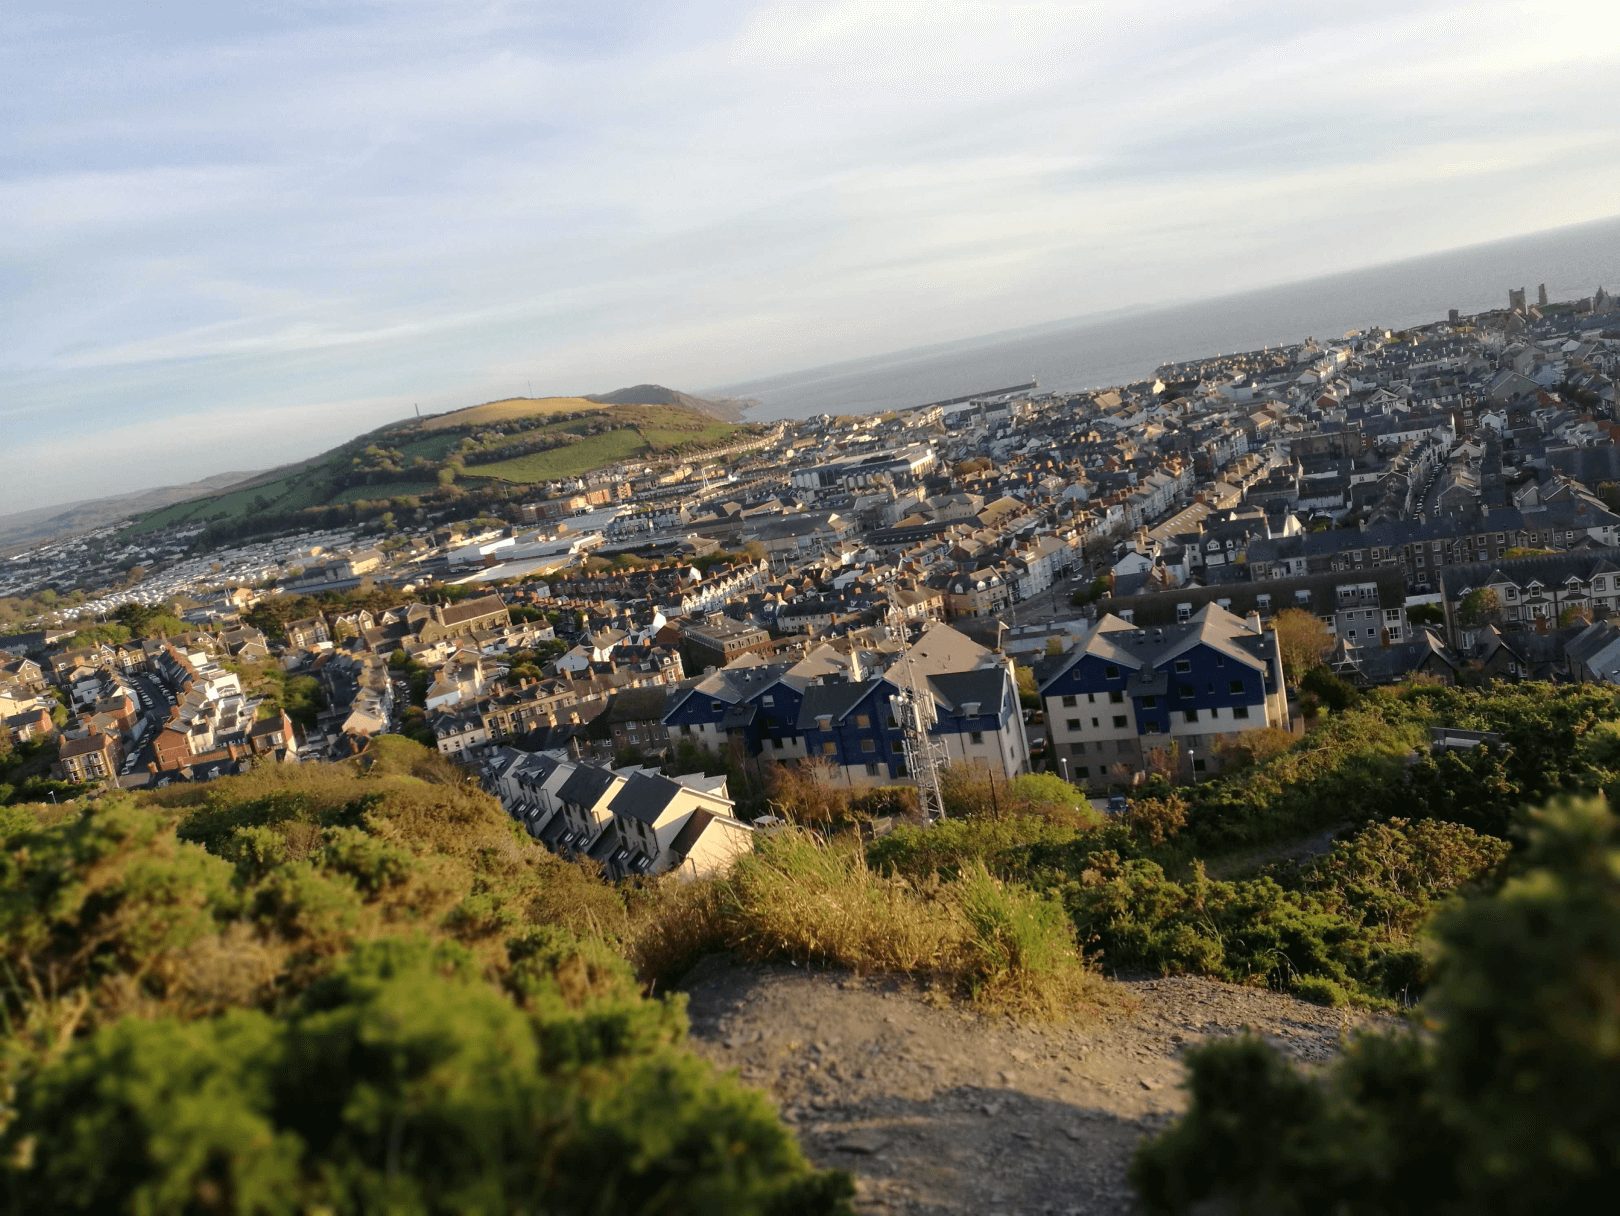 The town of Aberystwyth - city view photo